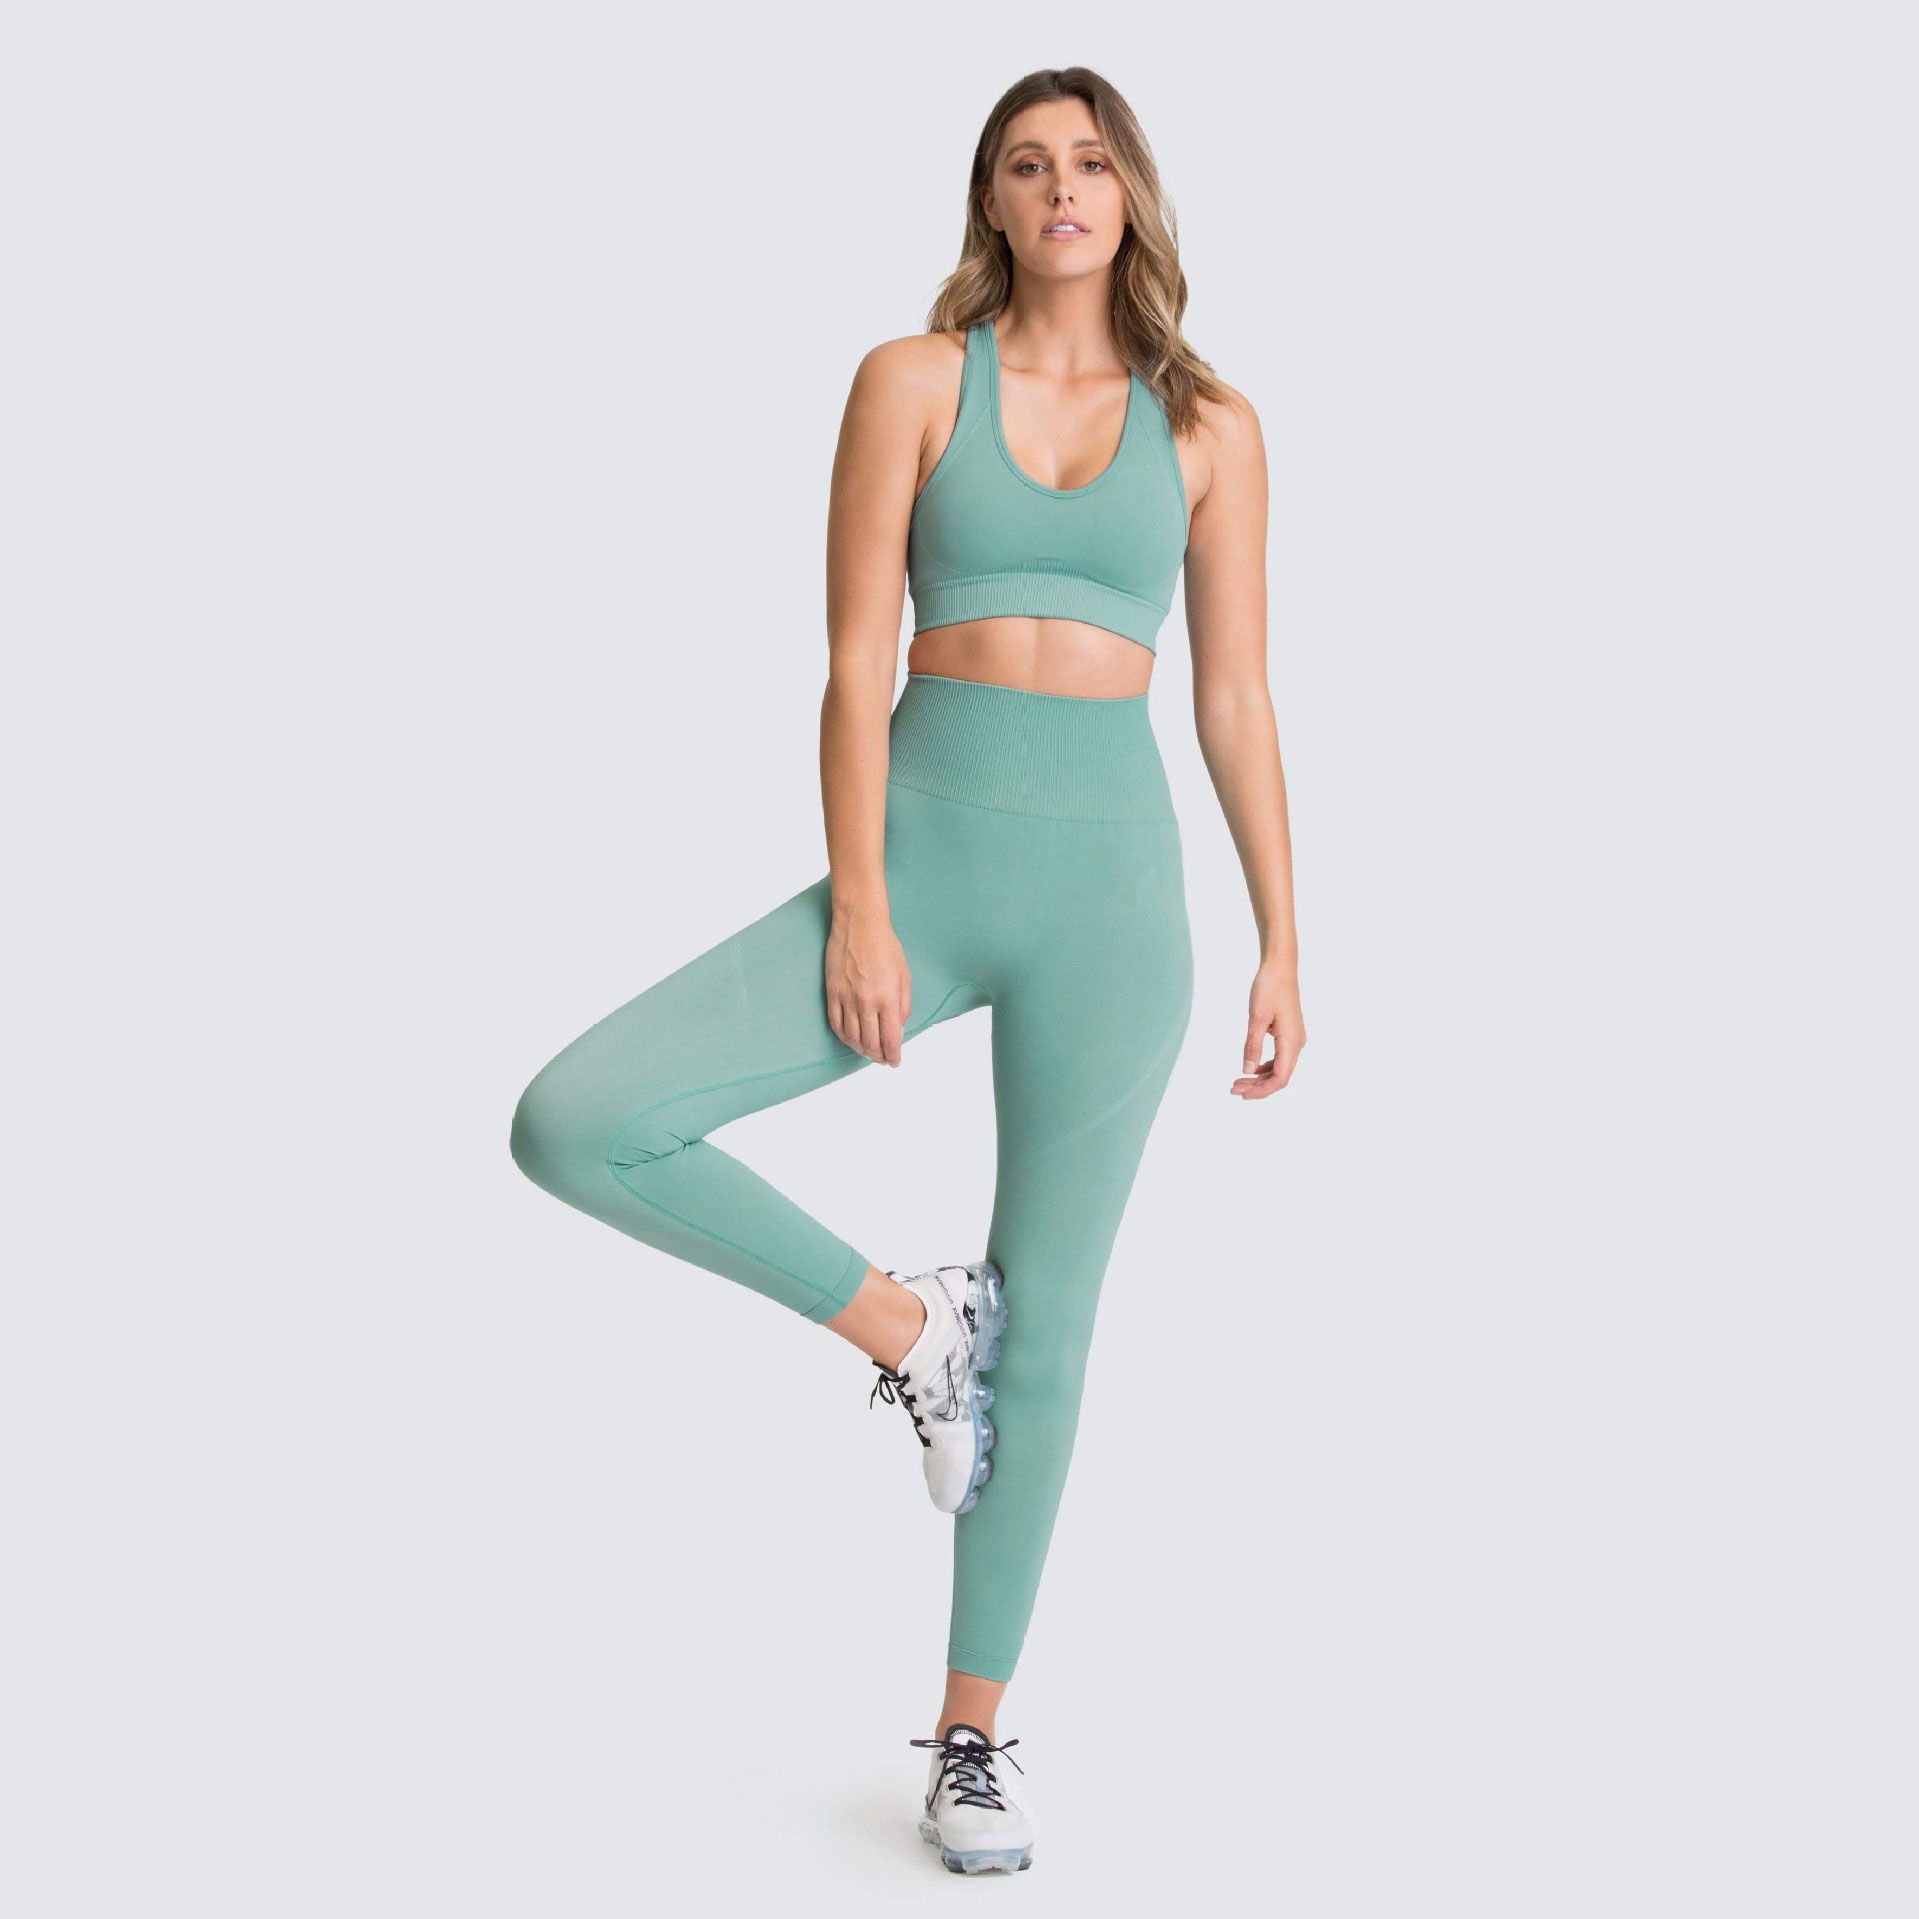 yoga outfit